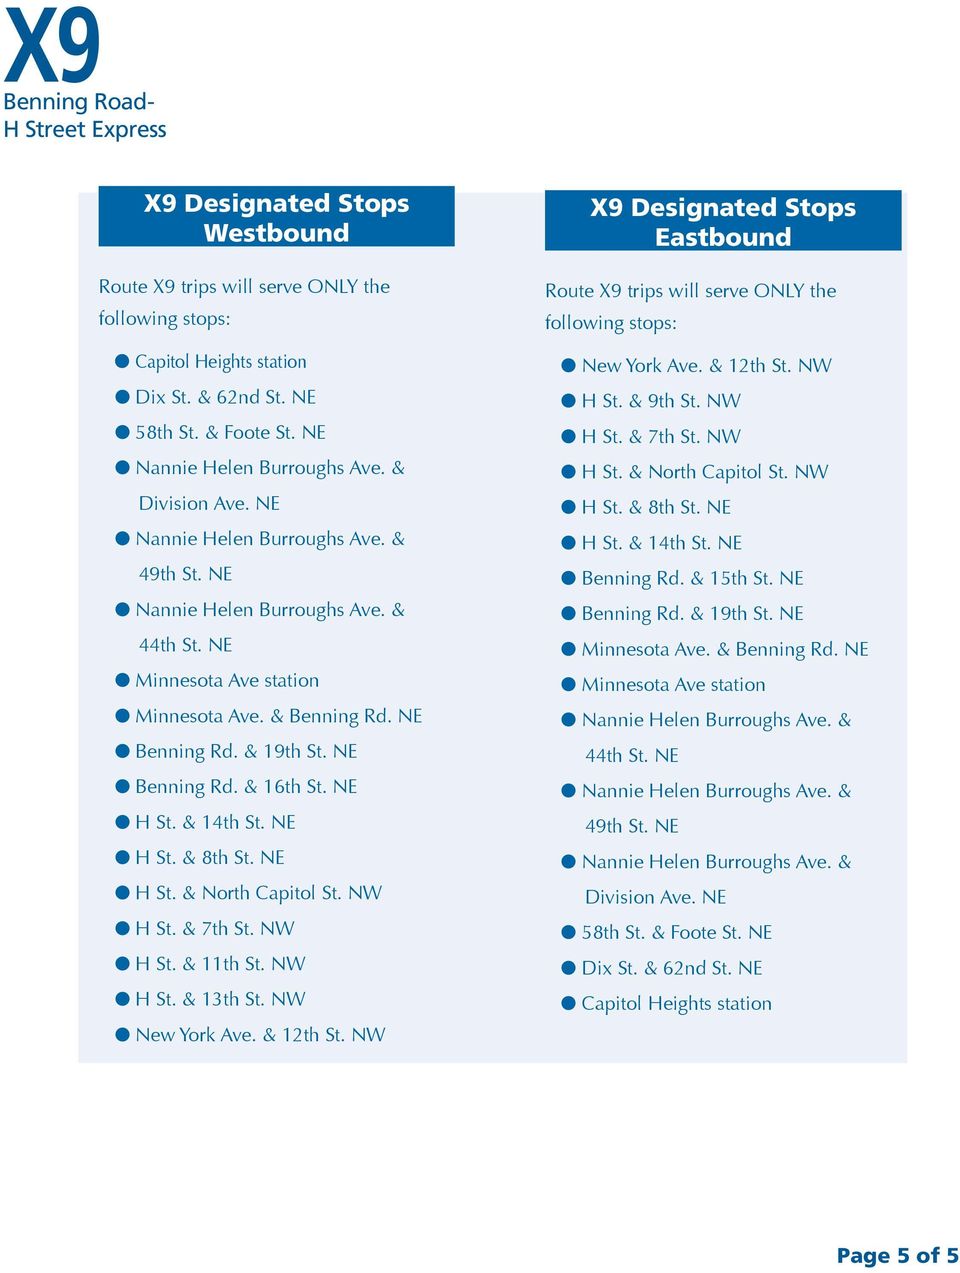 New York Ave. & 12th St. X9 Designated Stops Eastbound Route X9 trips will serve ONLY the following stops: New York Ave. & 12th St. H St. & 9th St. H St. & 7th St. H St. & North St. H St. & 8th St.